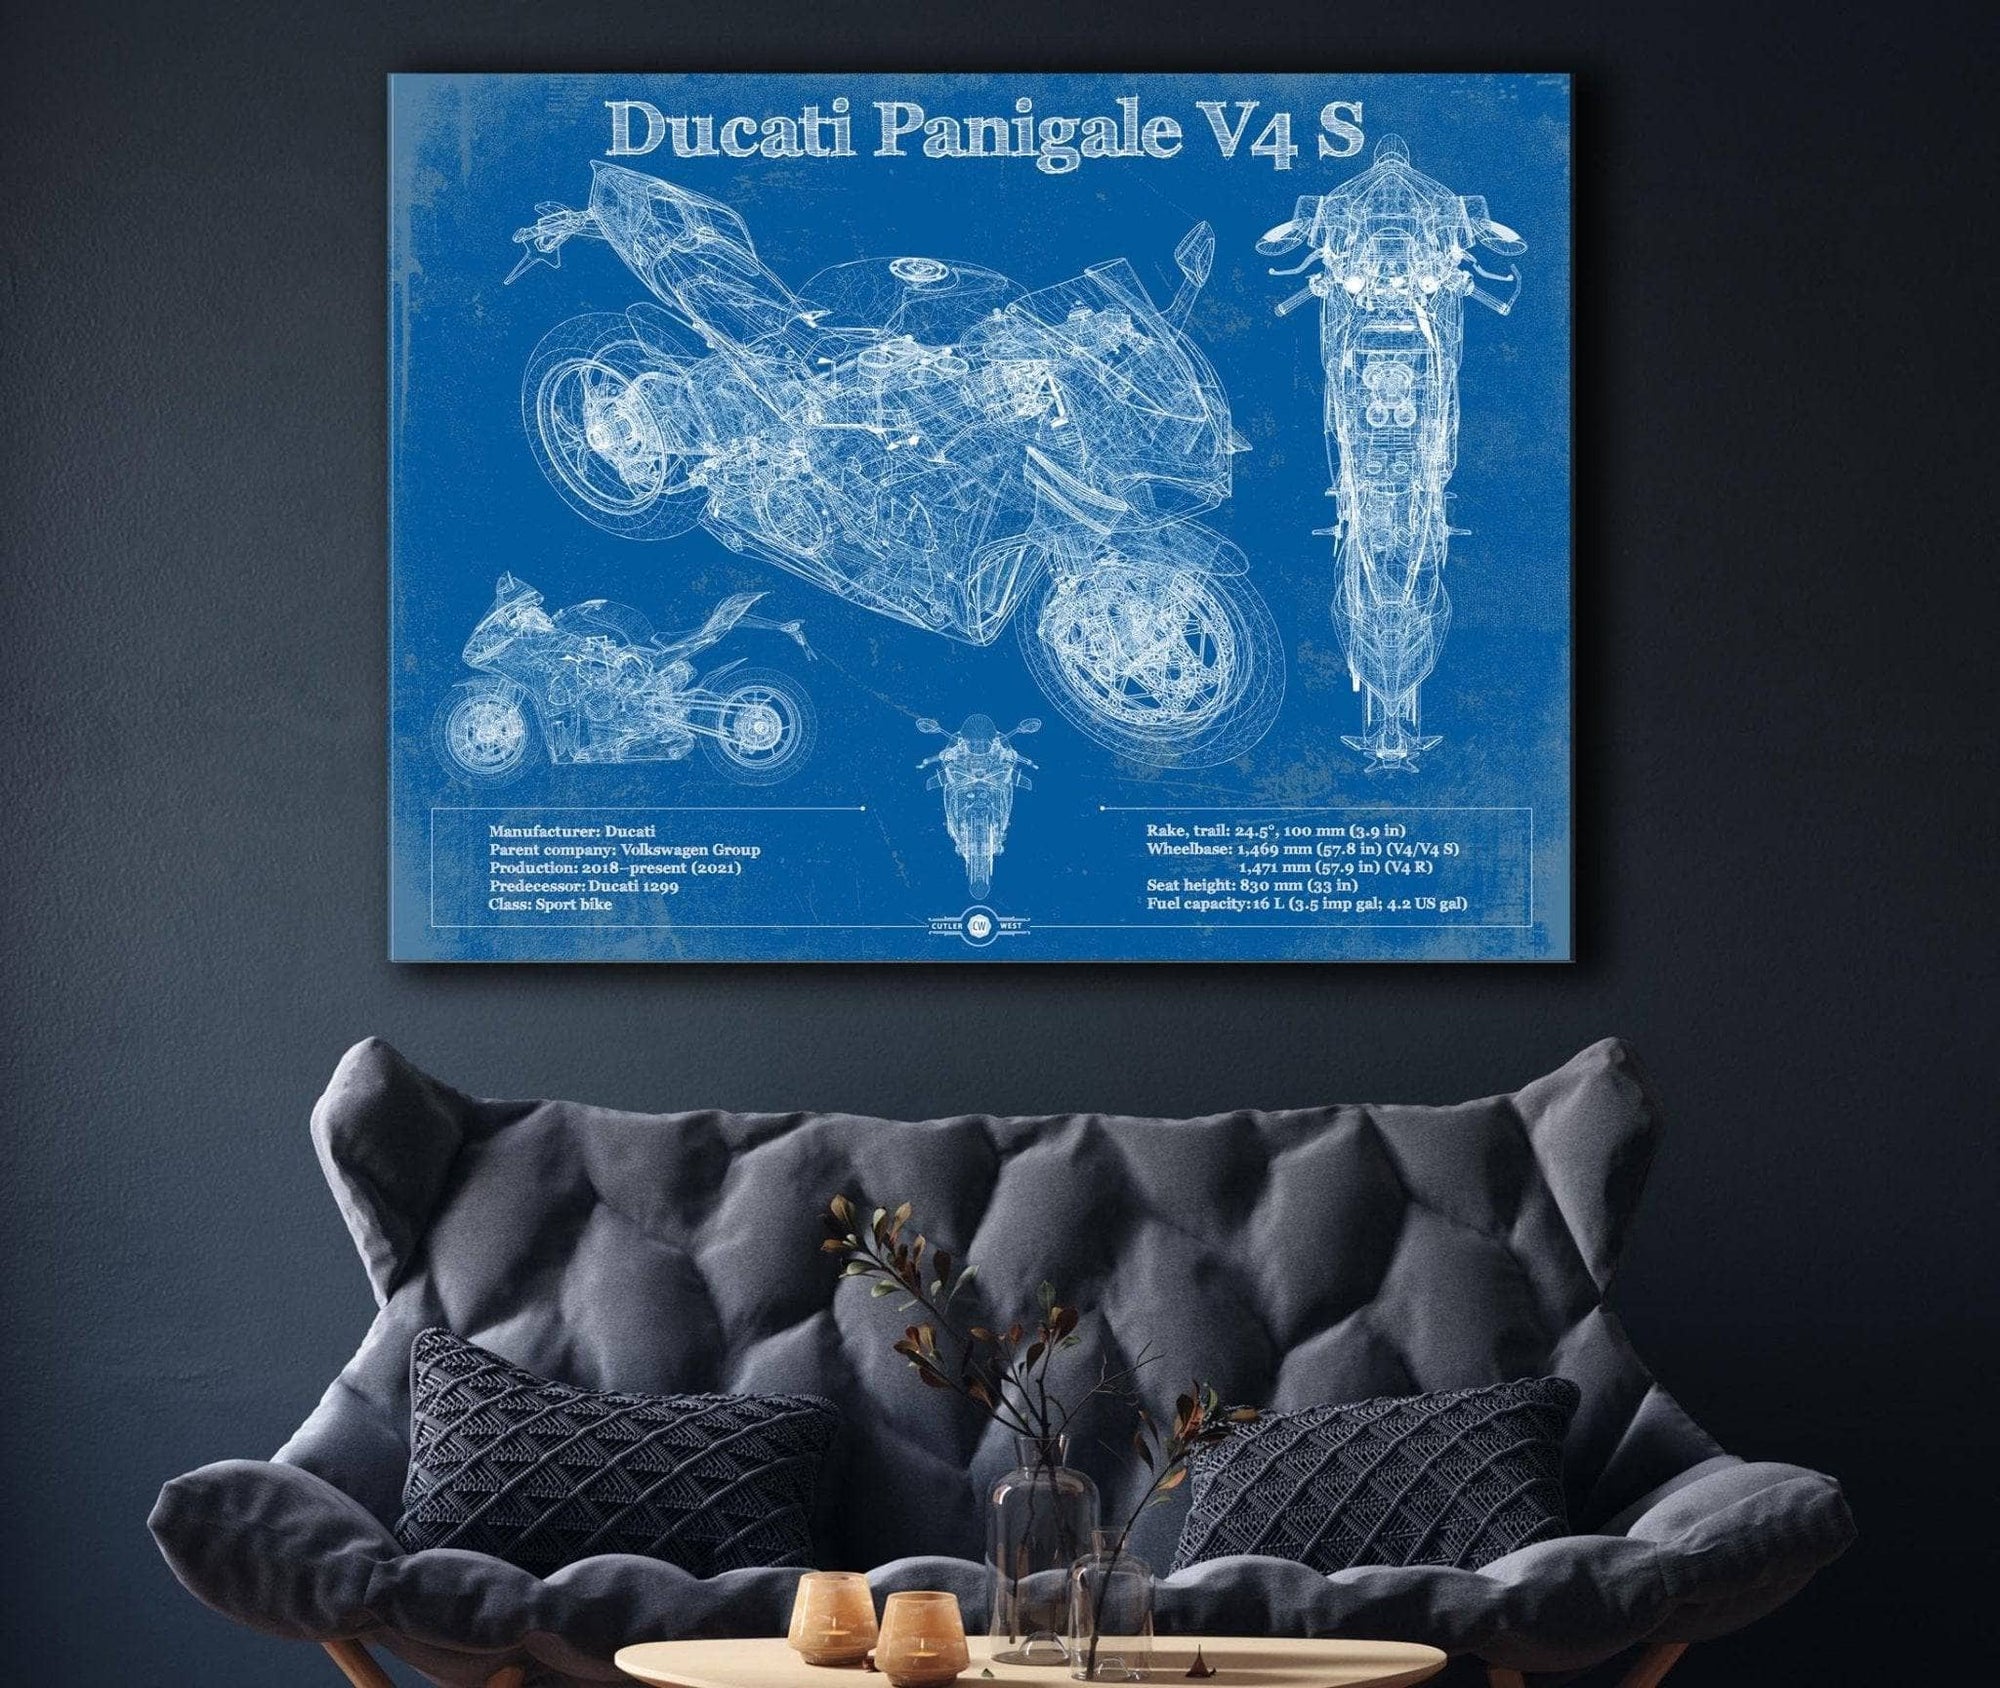 Cutler West Ducati Streetfighter V4 2020 Blueprint Motorcycle Patent Print